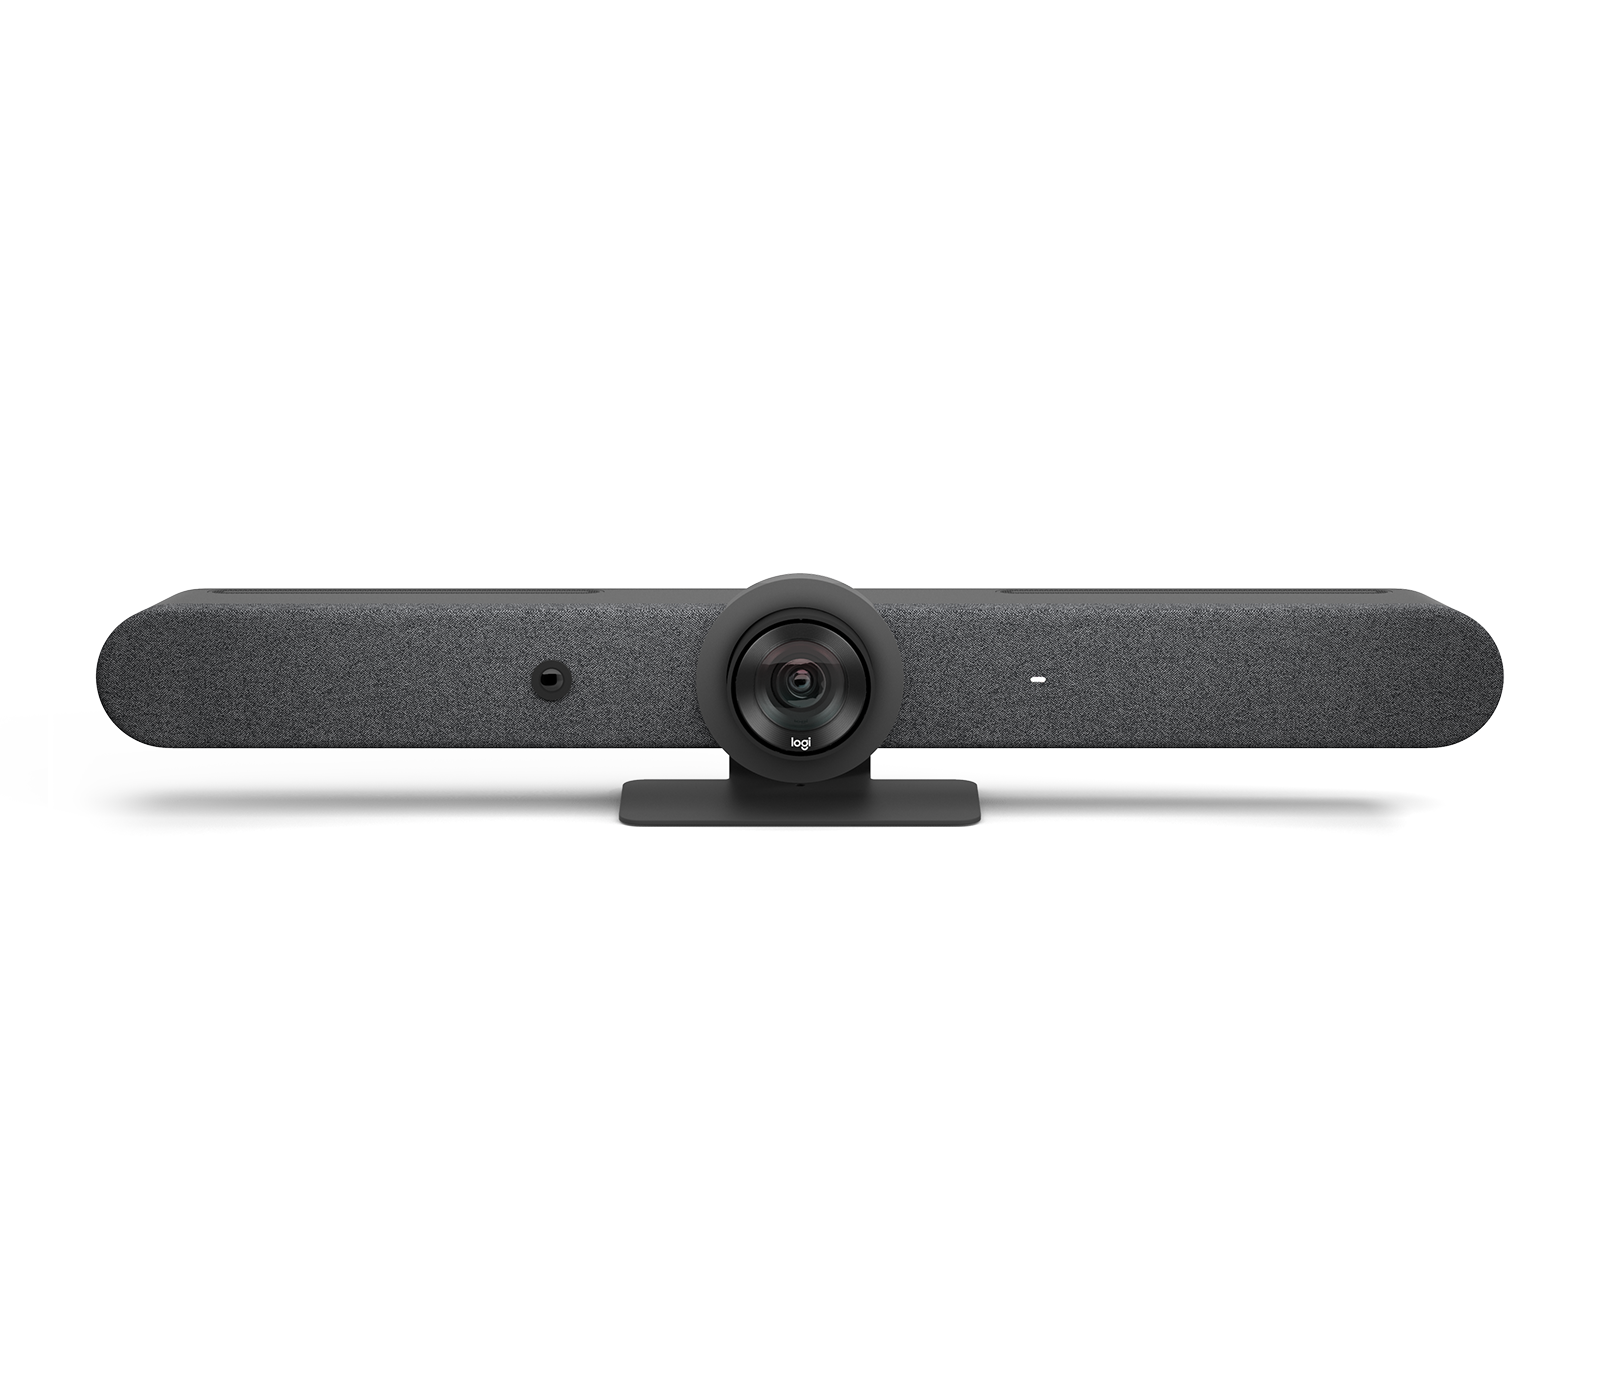 LOGITECH RALLY Bar ConferenceCam 960-001312 Graphite (2 Years Manufacture Local Warranty In Singapore) - Promo Price While Stock Last